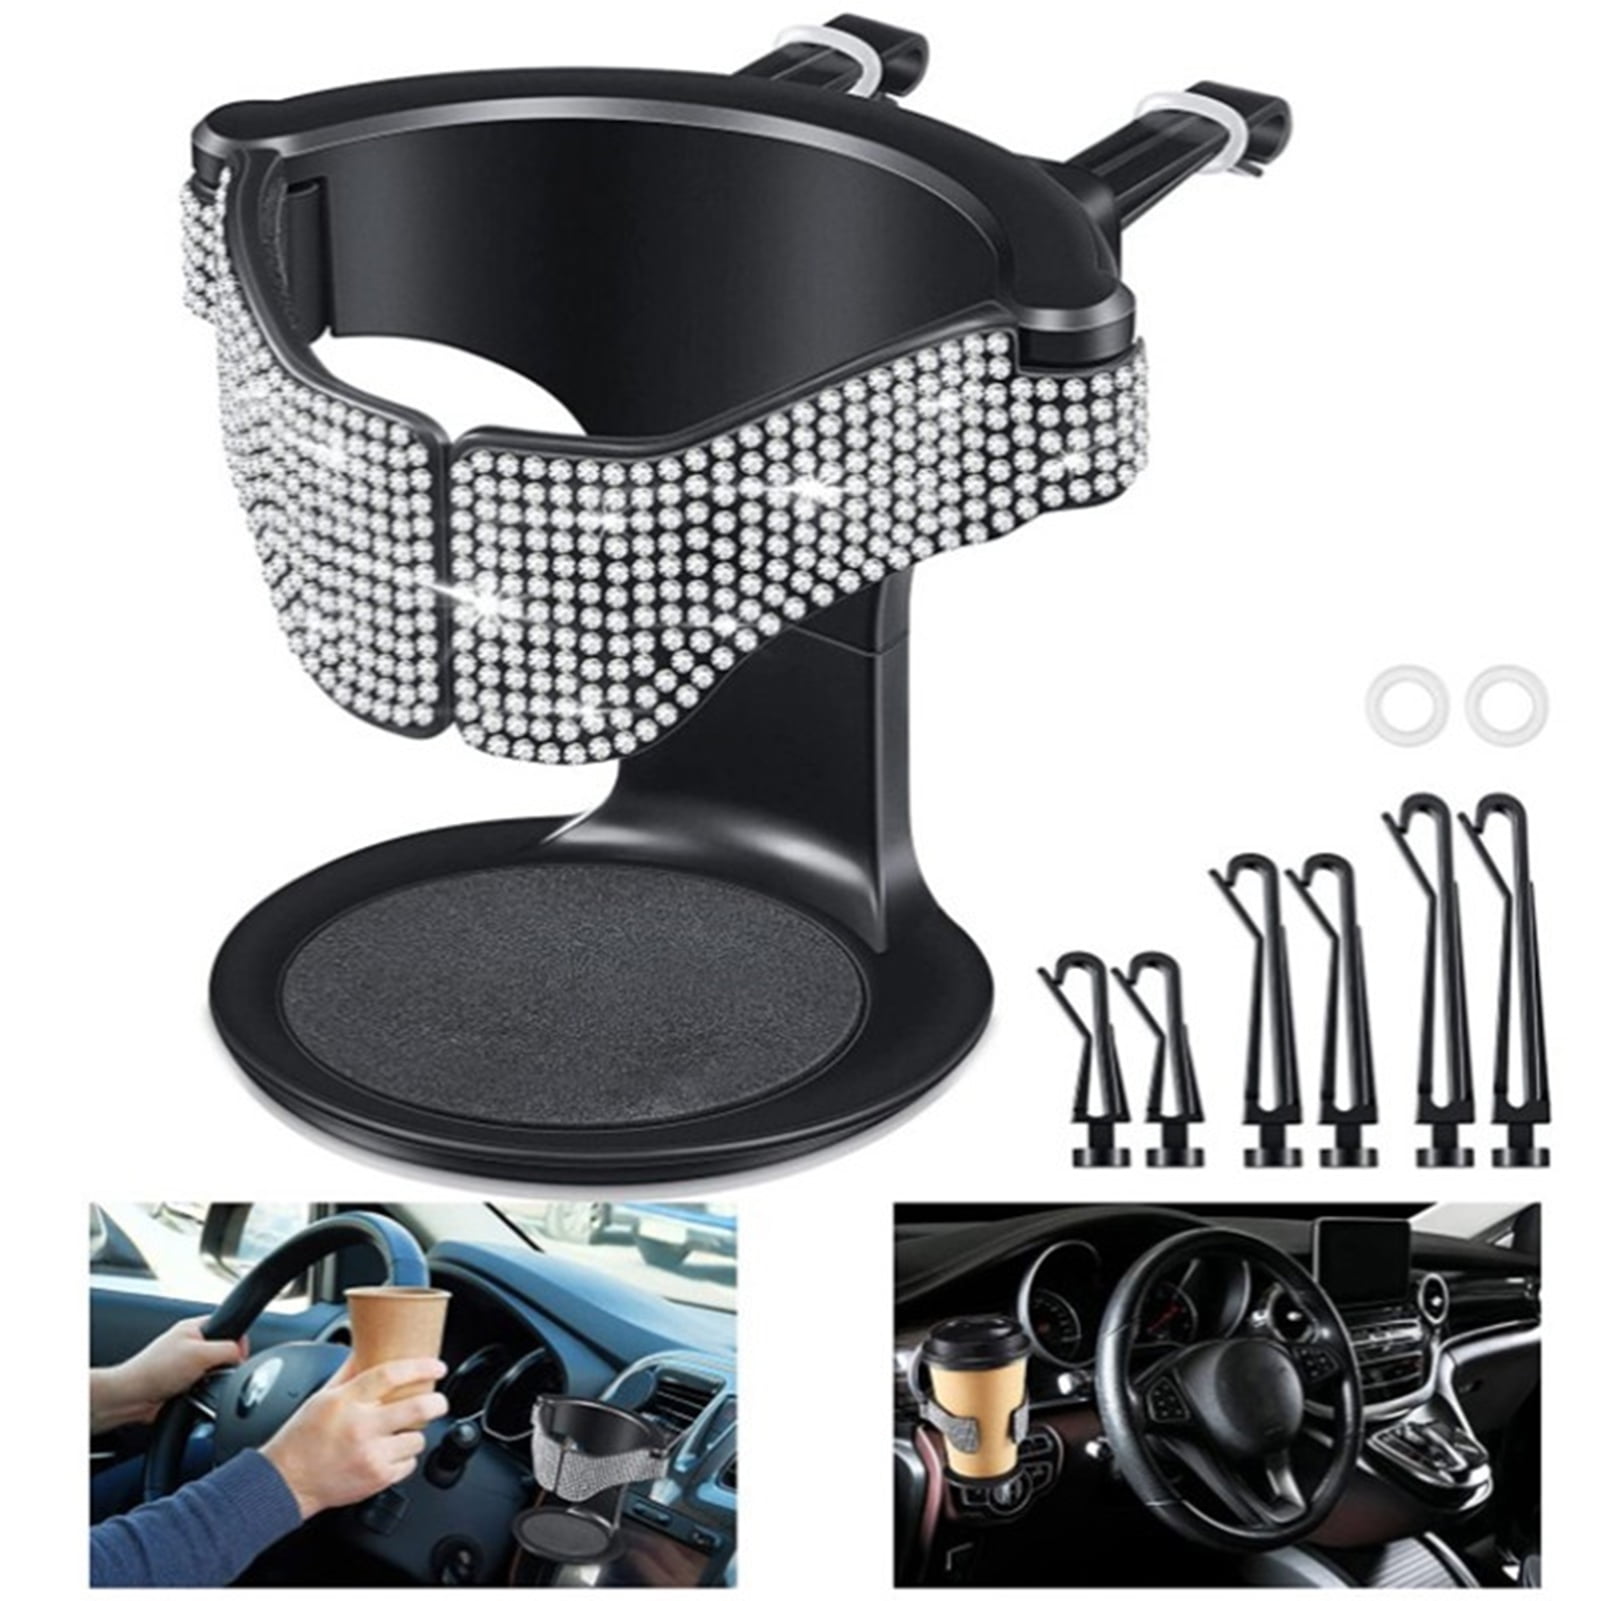 Drilled Front Air Outlet Water Cup Holder Bling Rhinestone Drink Holder For  Ashtray Water Cup Kettle Car Accessories